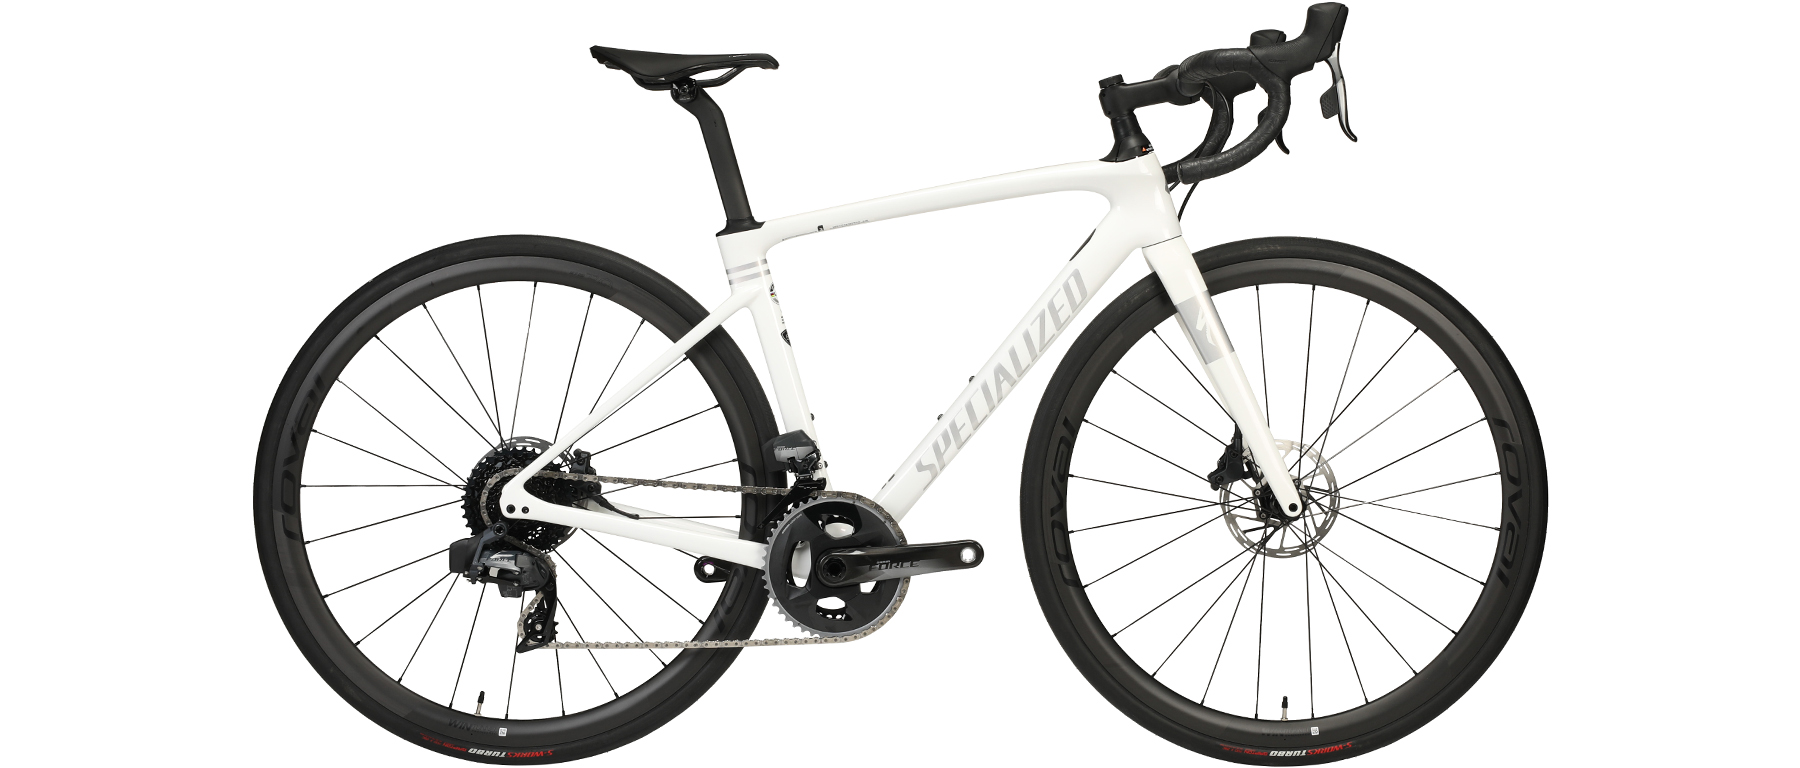 Specialized Roubaix Pro Bicycle